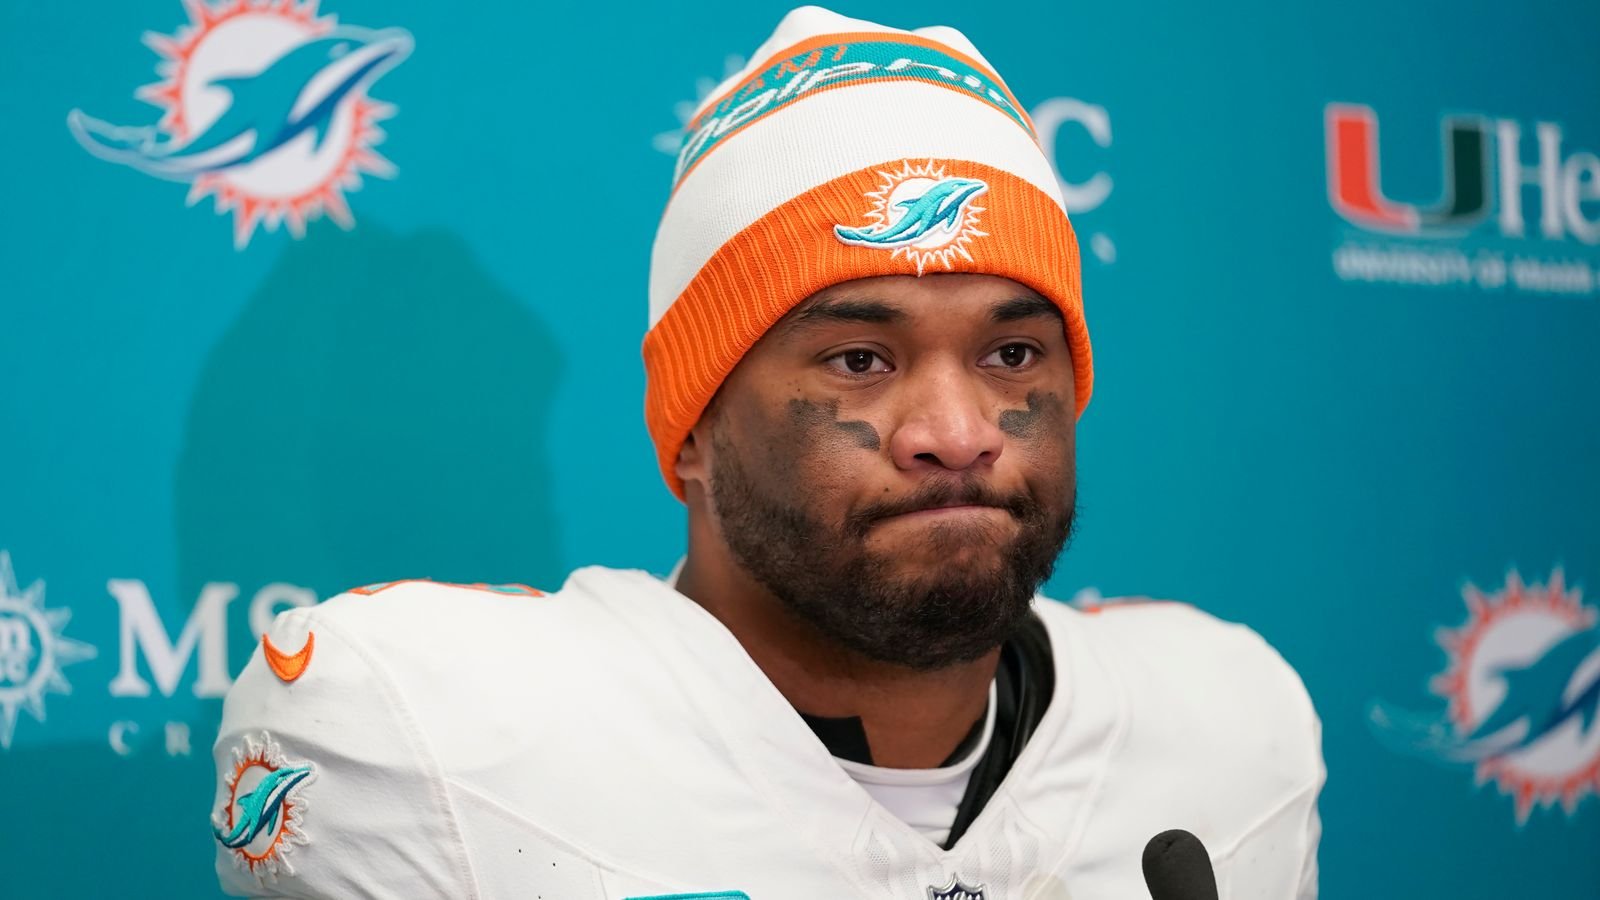 Tua Tagovailoa ‘not enough’ to lead Miami Dolphins to Super Bowl success after playoff exit, says Phoebe Schecter | NFL News